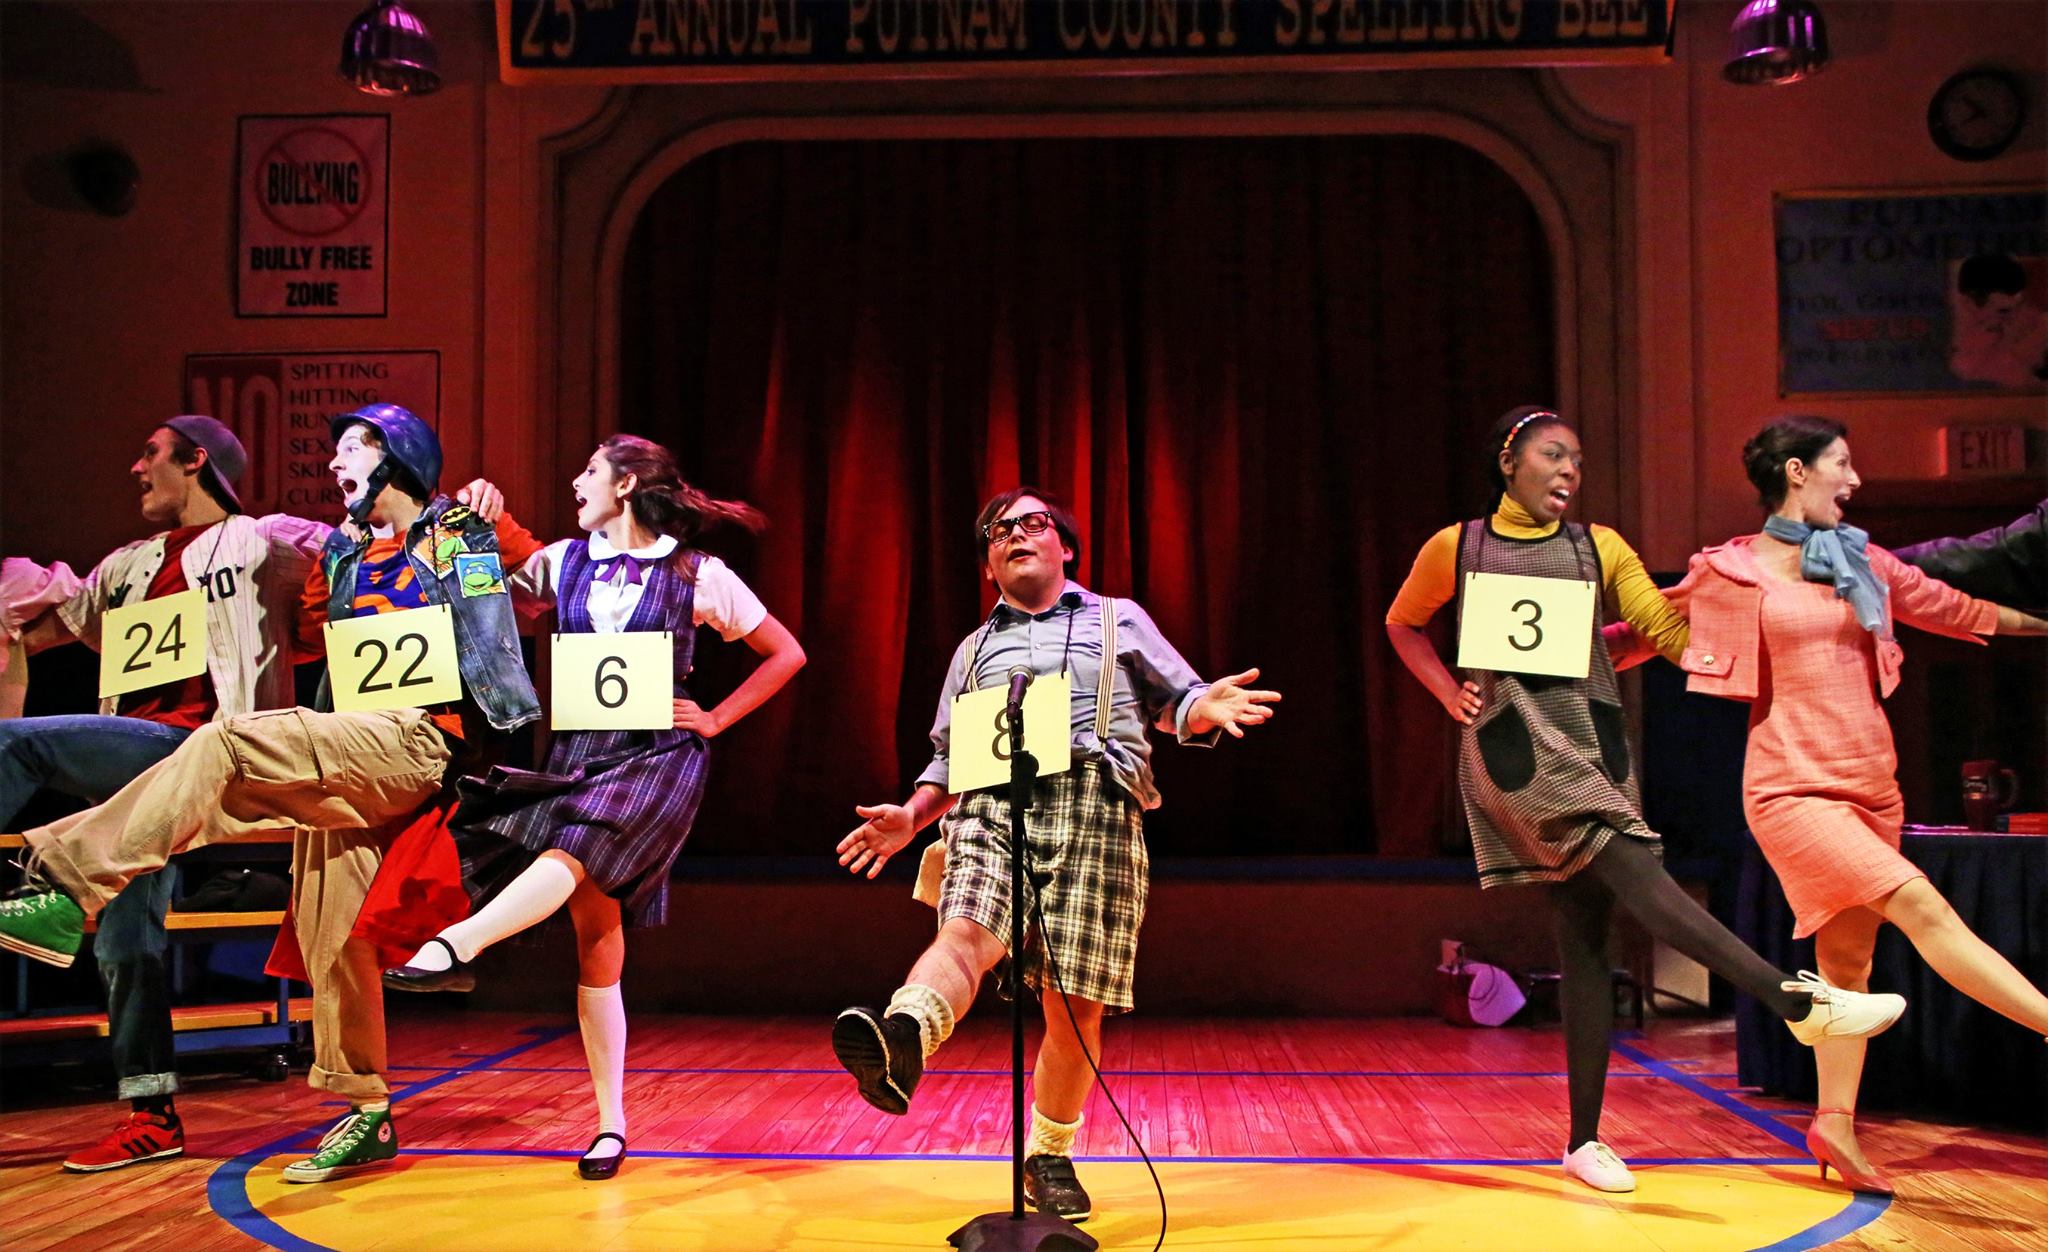   The 25th Annual Putnam County Spelling Bee  